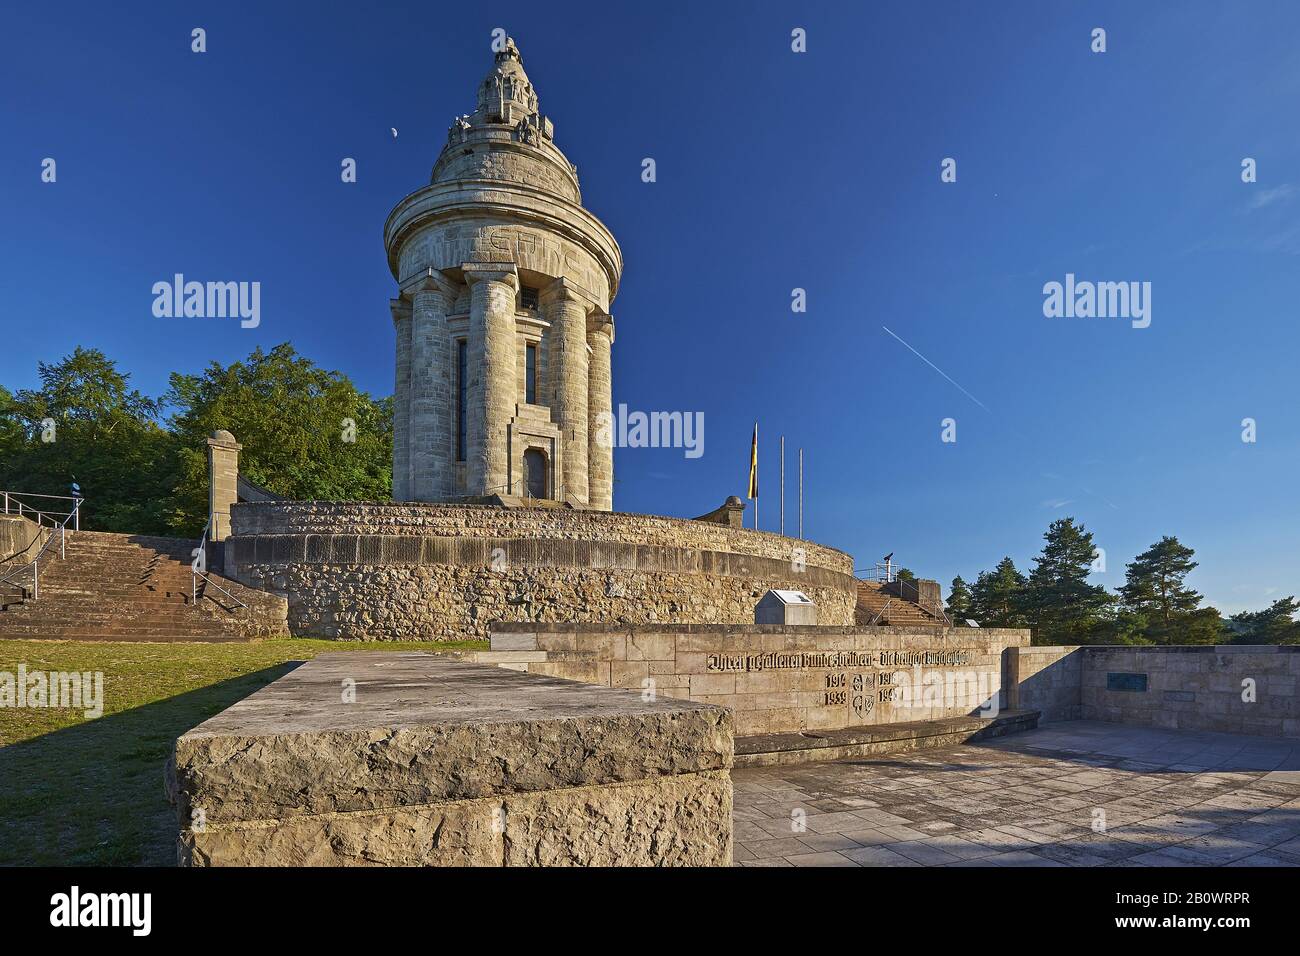 Fraternity memorial on the Göpelskuppe, war memorial for fallen fraternity members, national memorial of the German Fraternity to commemorate the unification of the Reich in 1871, Eisenach, Thuringia, Germany, Europe Stock Photo